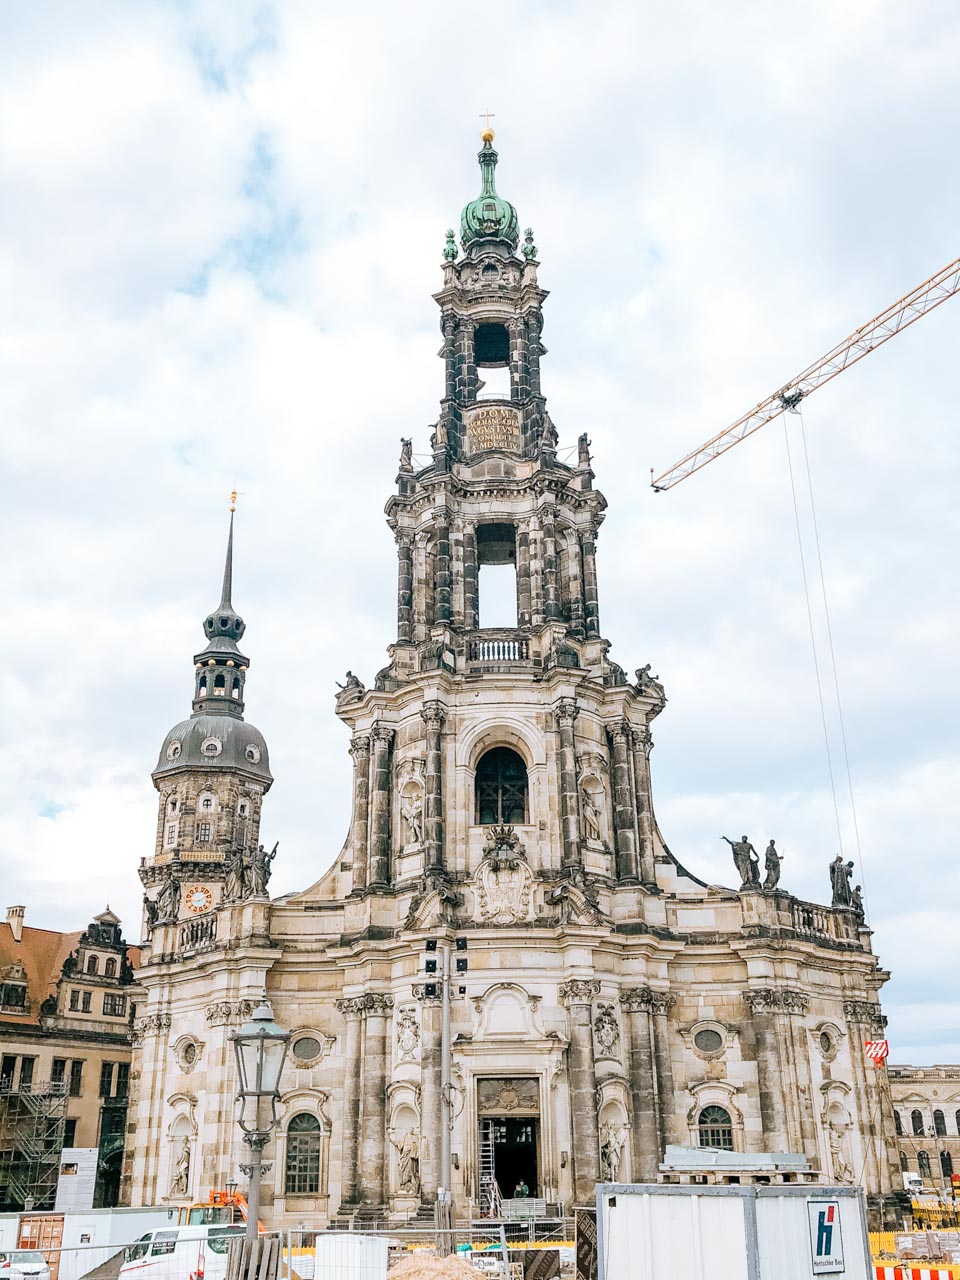 Construction work outside Dresden Cathedral